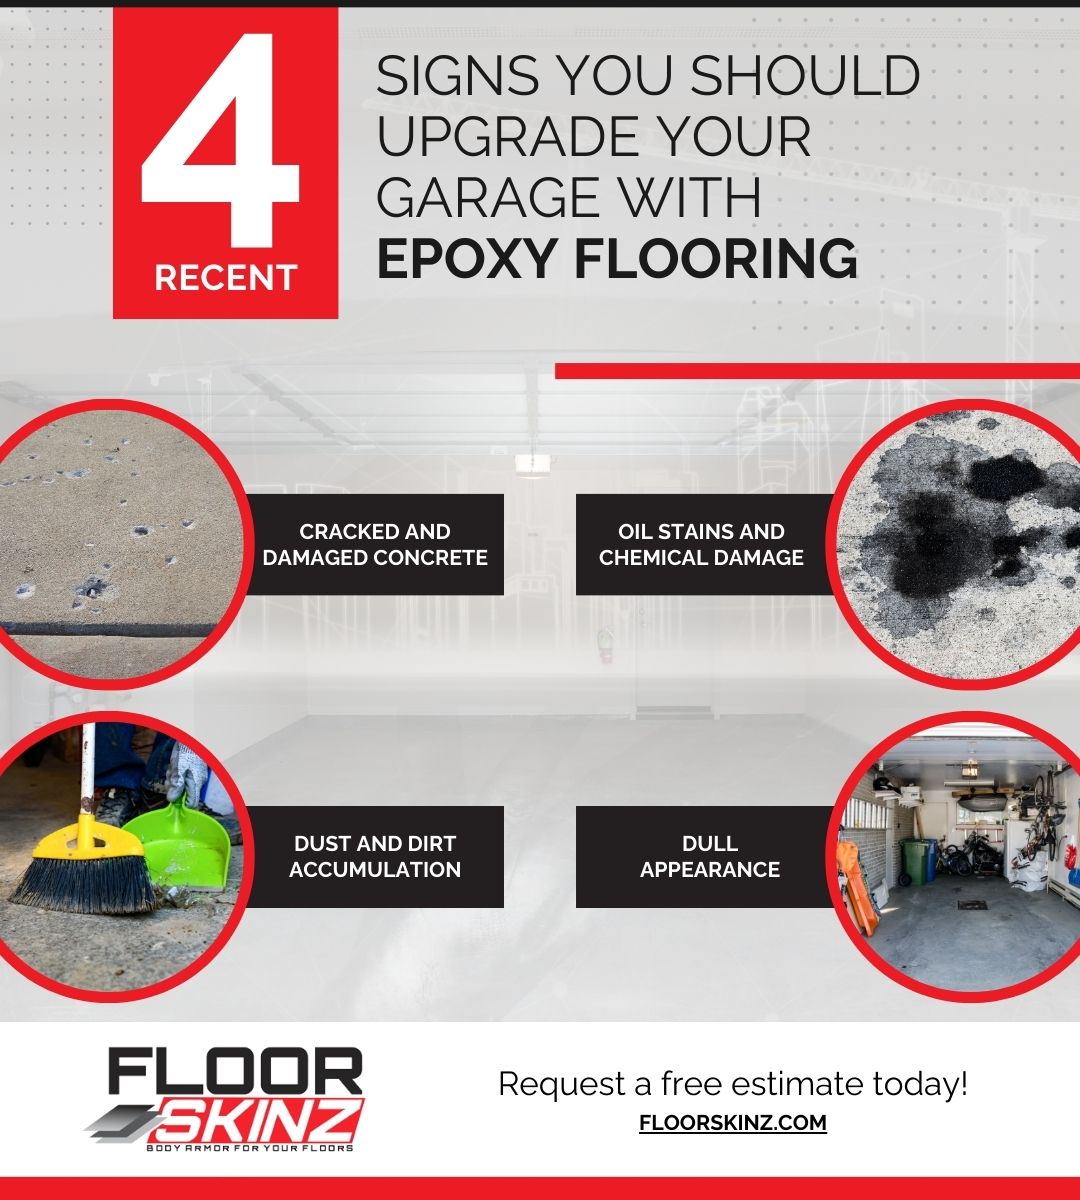 infographic about signs to upgrade your garage with epoxy flooring